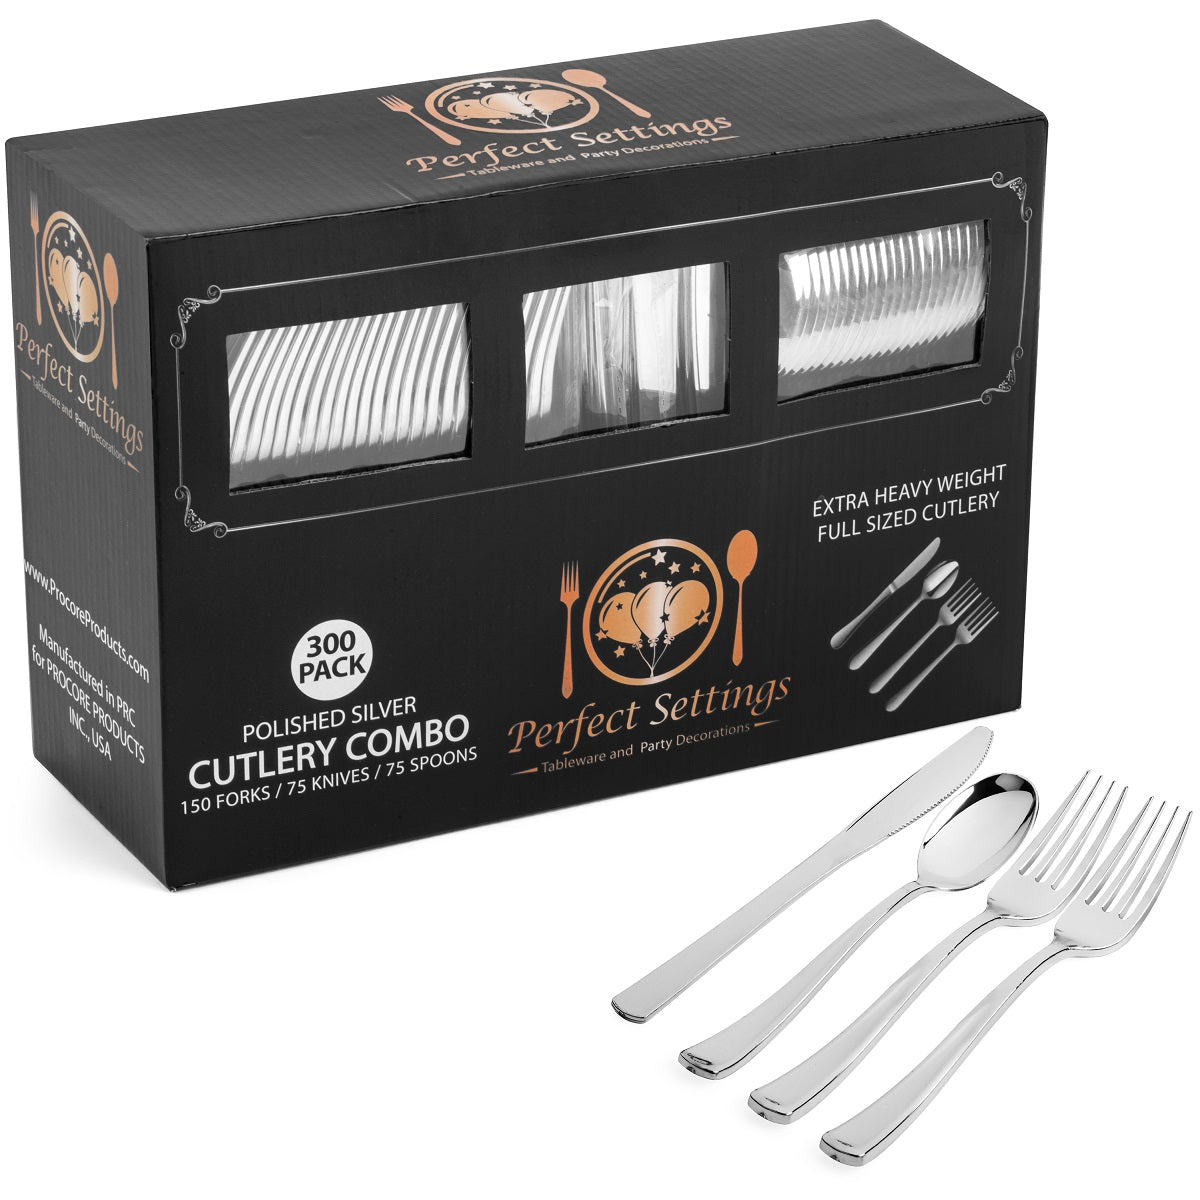 300 Pack 75 Guests - Plastic Disposable Cutlery Silverware Set (Extra Forks)